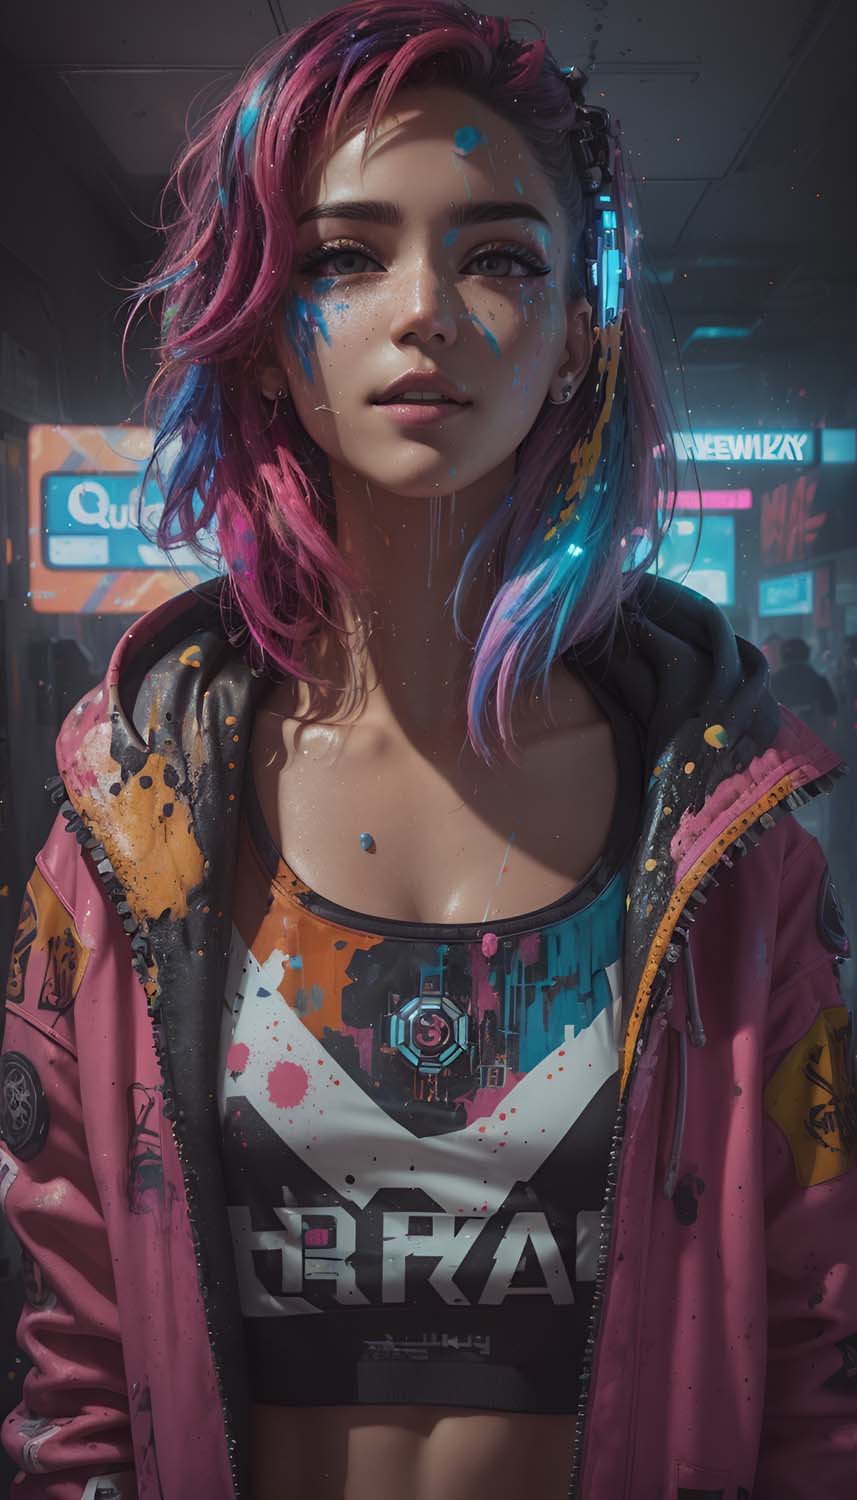 Premium Photo | Cyberpunk woman portrait with vr headset in high quality  avatar wallpaper high resolution neon fururistic cyber implants technology  universe light city technology addiction ai